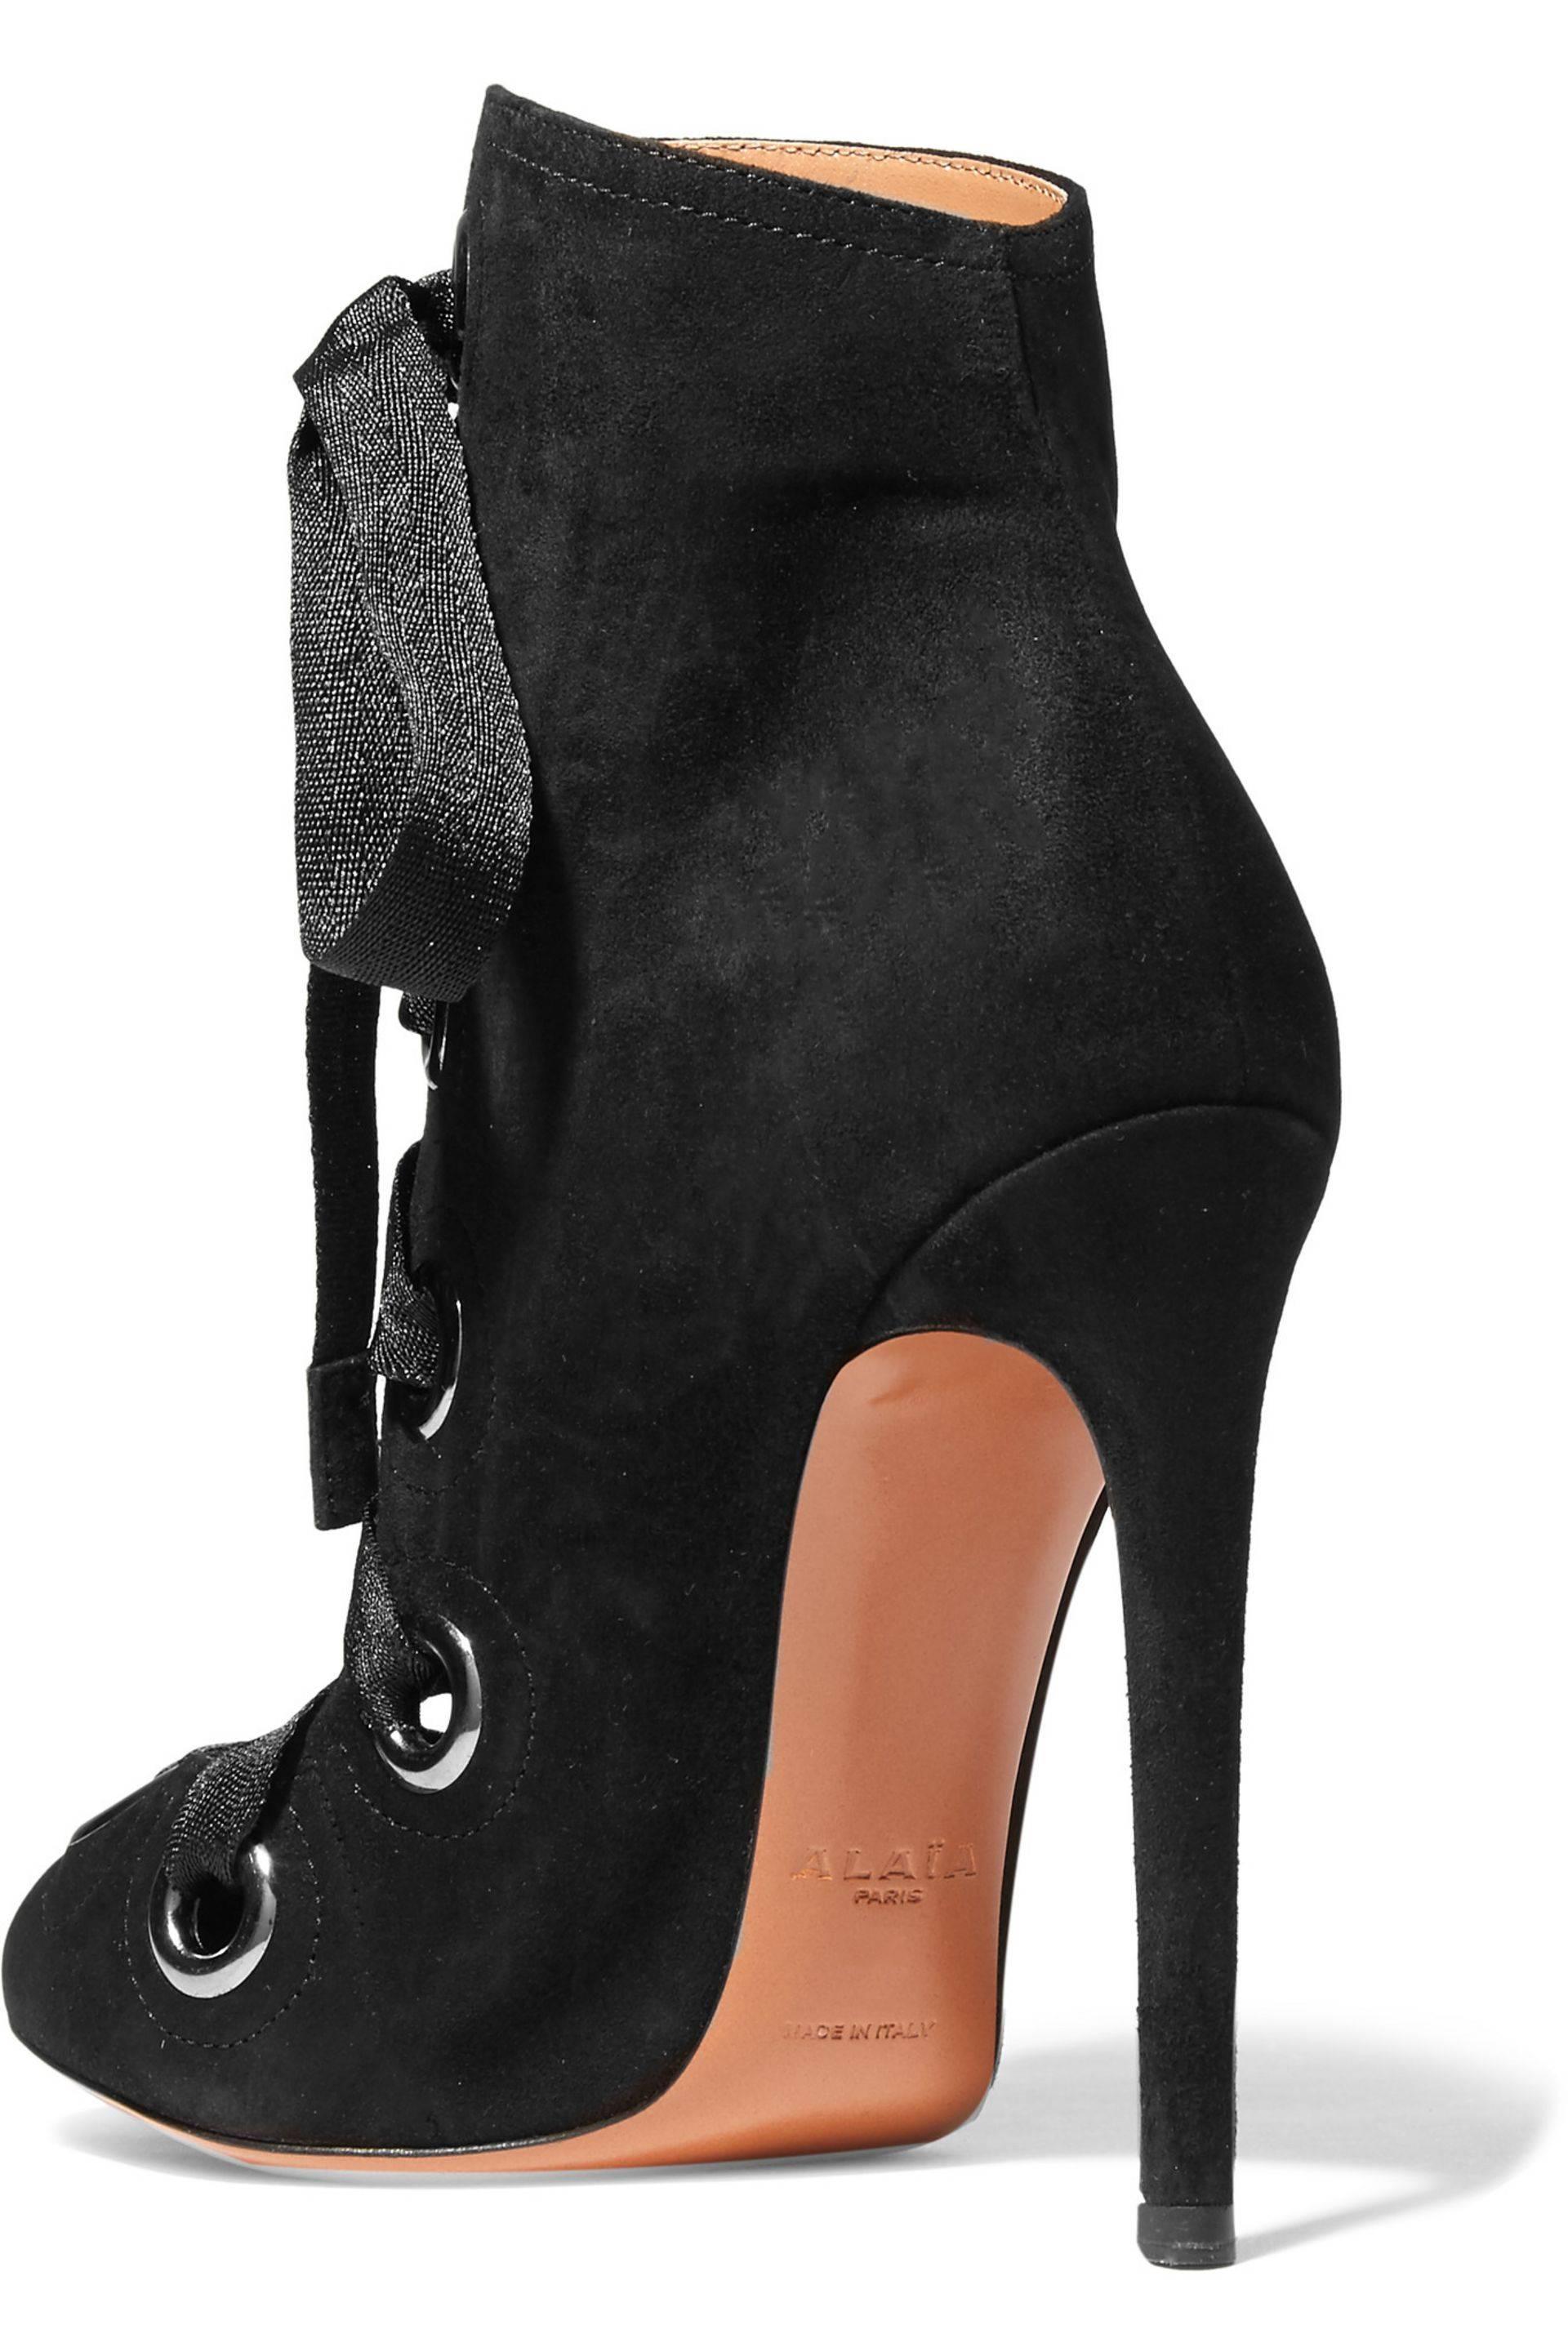 Alaia New Black Suede Tie Evening Ankle Booties Boots in Box In New Condition In Chicago, IL